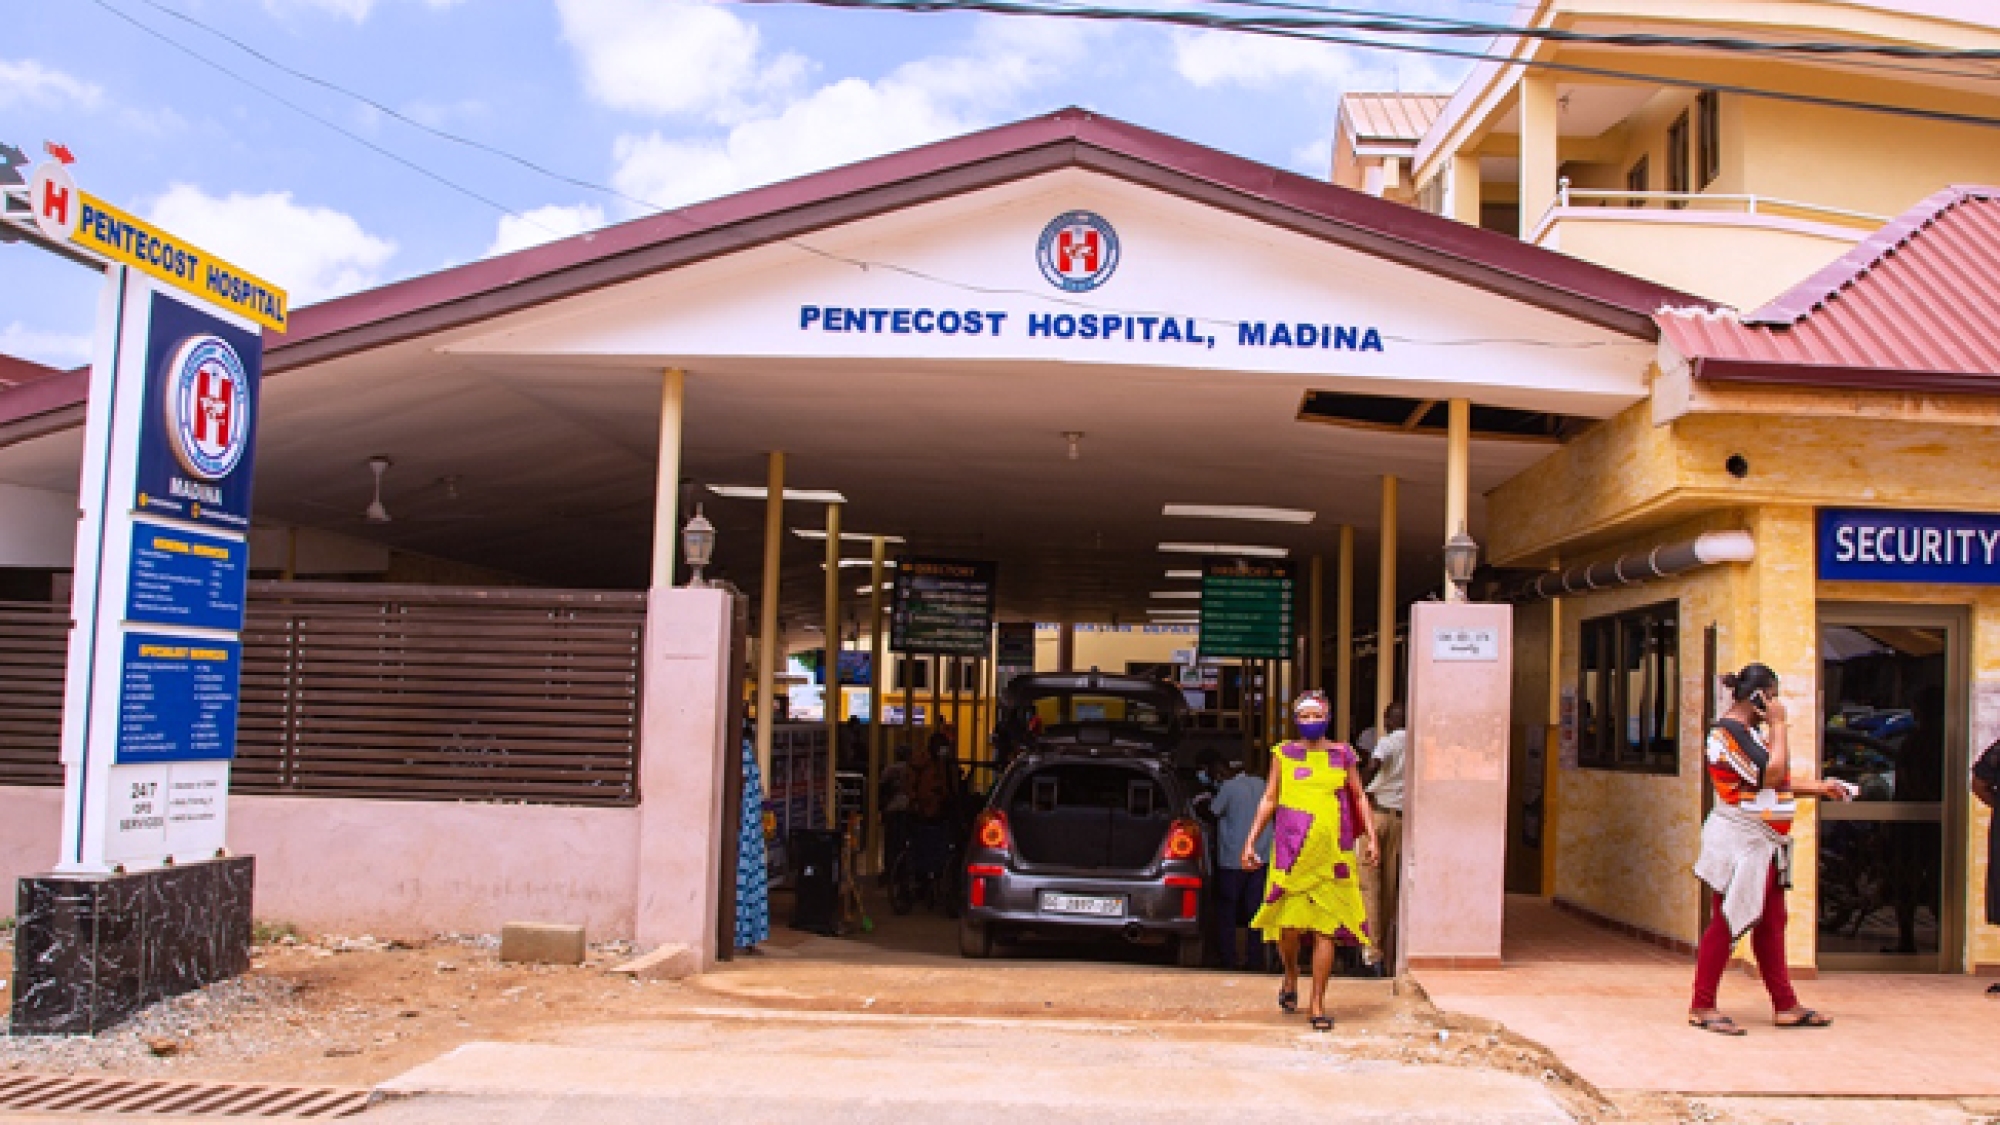 The Church of Pentecost Spent GH₵ 2.9 Million On Members’ Healthcare